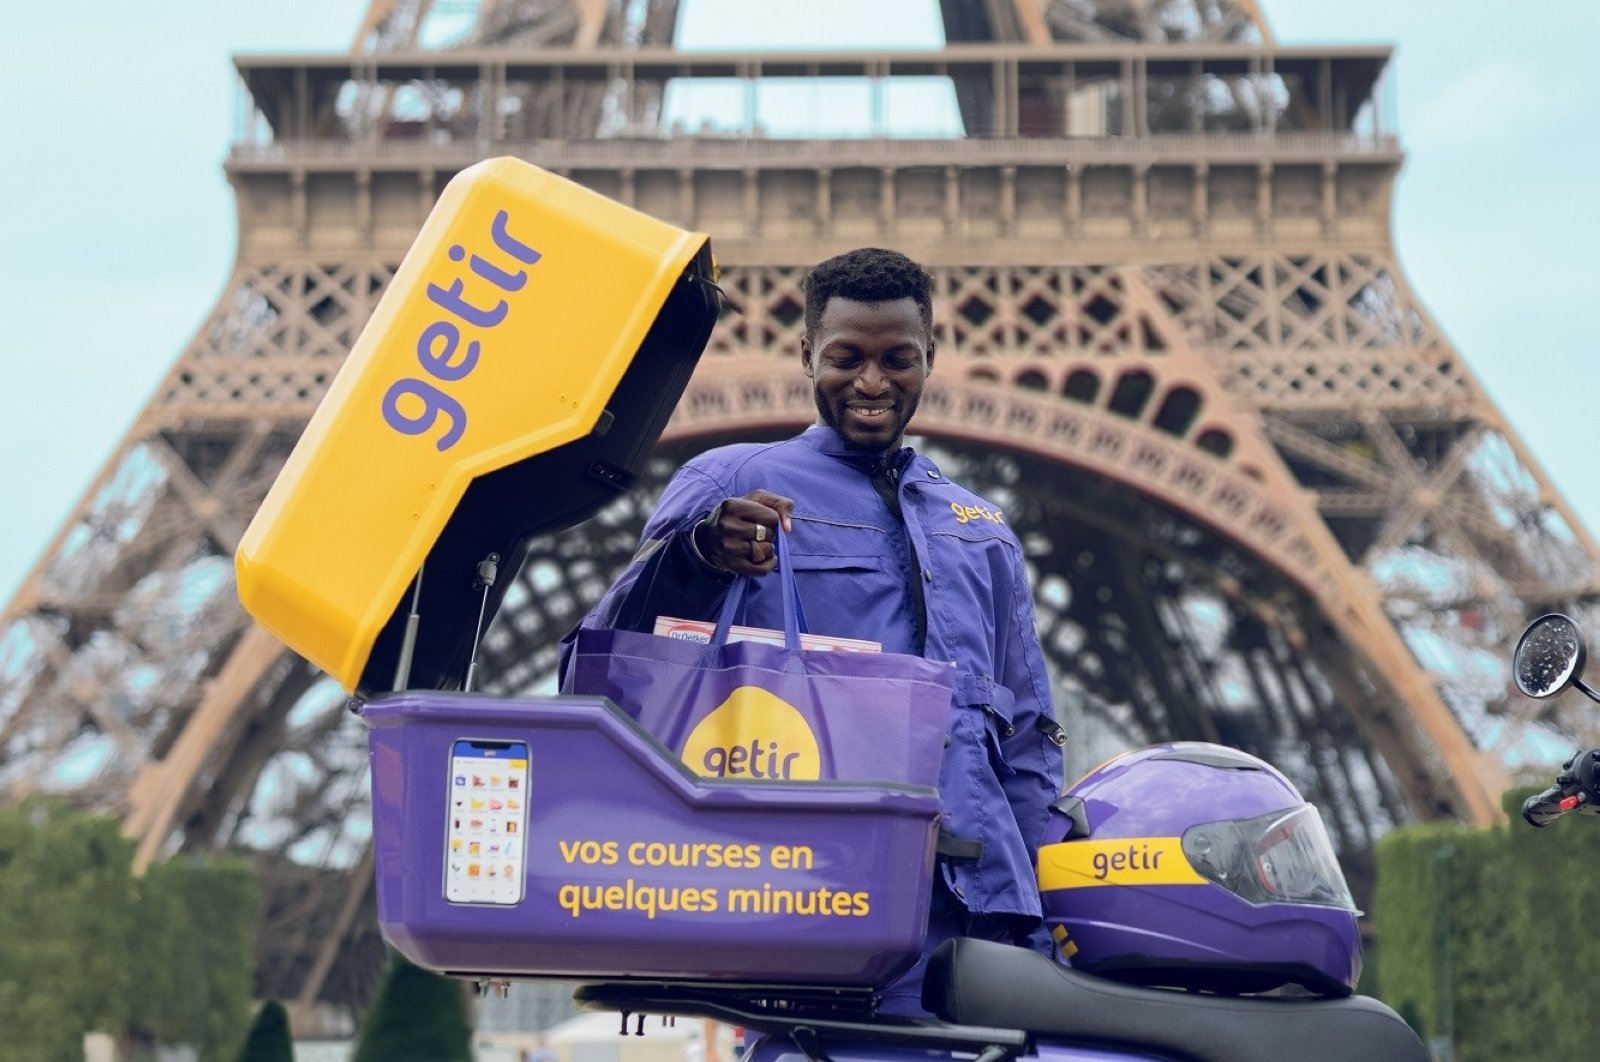 New Partnership Between Uber Eats And Getir To Revolutionize Grocery Deliveries In Europe